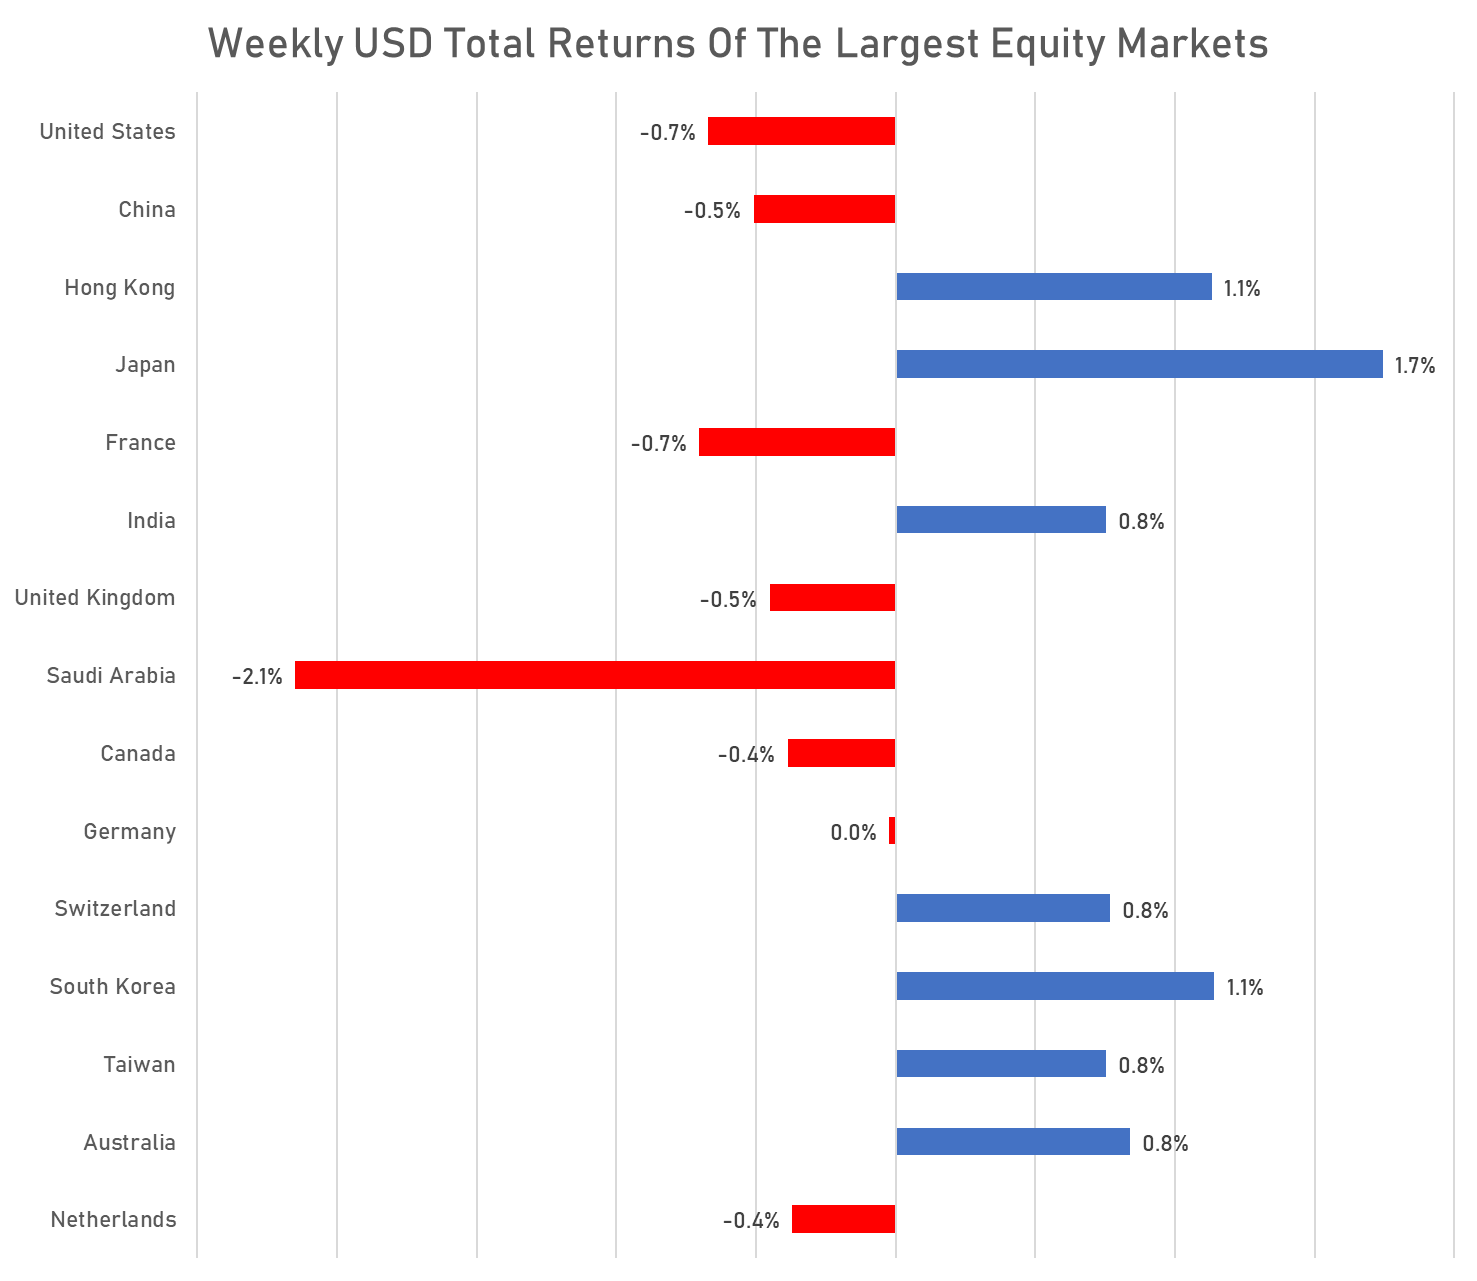 Weekly USD Total returns of major equity markets | Sources: phipost.com, FactSet data